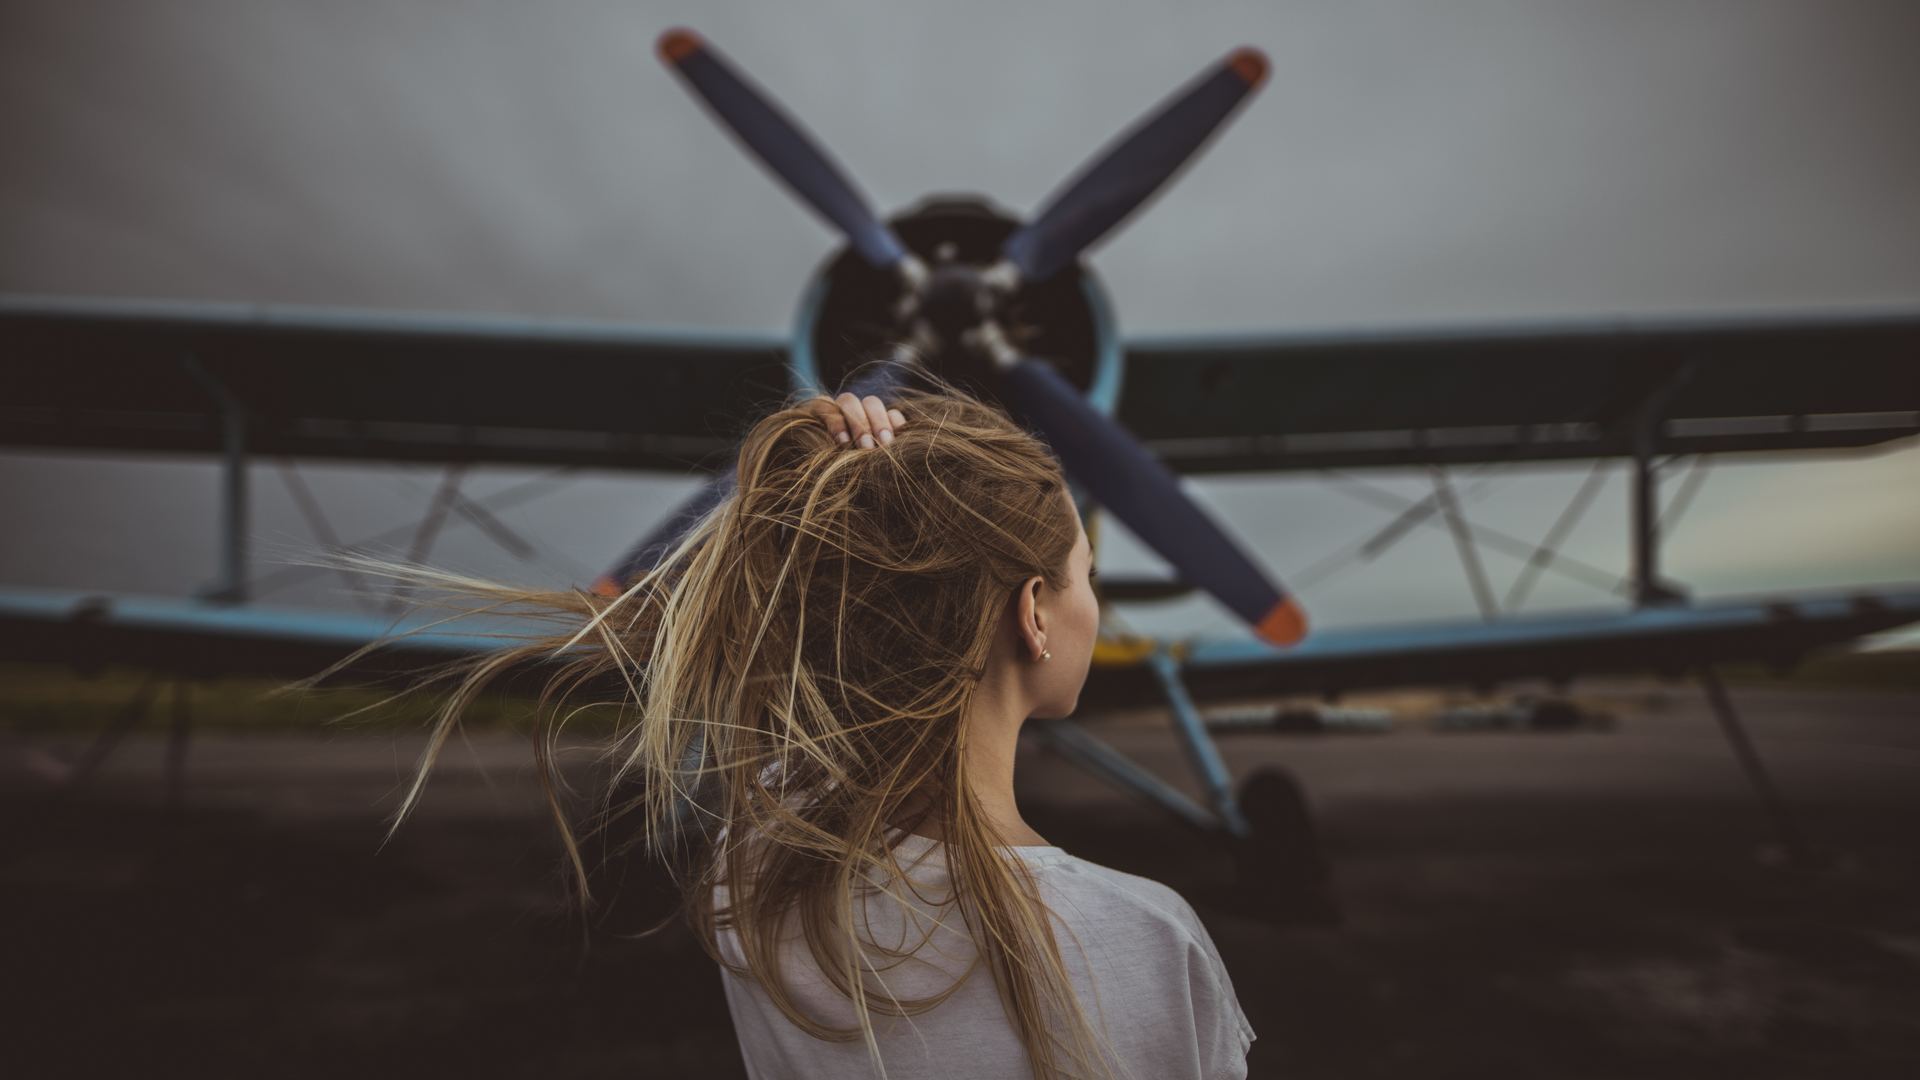 People 1920x1080 model women wind hair blowing in the wind long hair blonde white t-shirt depth of field motion blur looking away back runway aircraft rear view Warbird T-shirt women with planes propeller vehicle airplane wing Antonov An-2